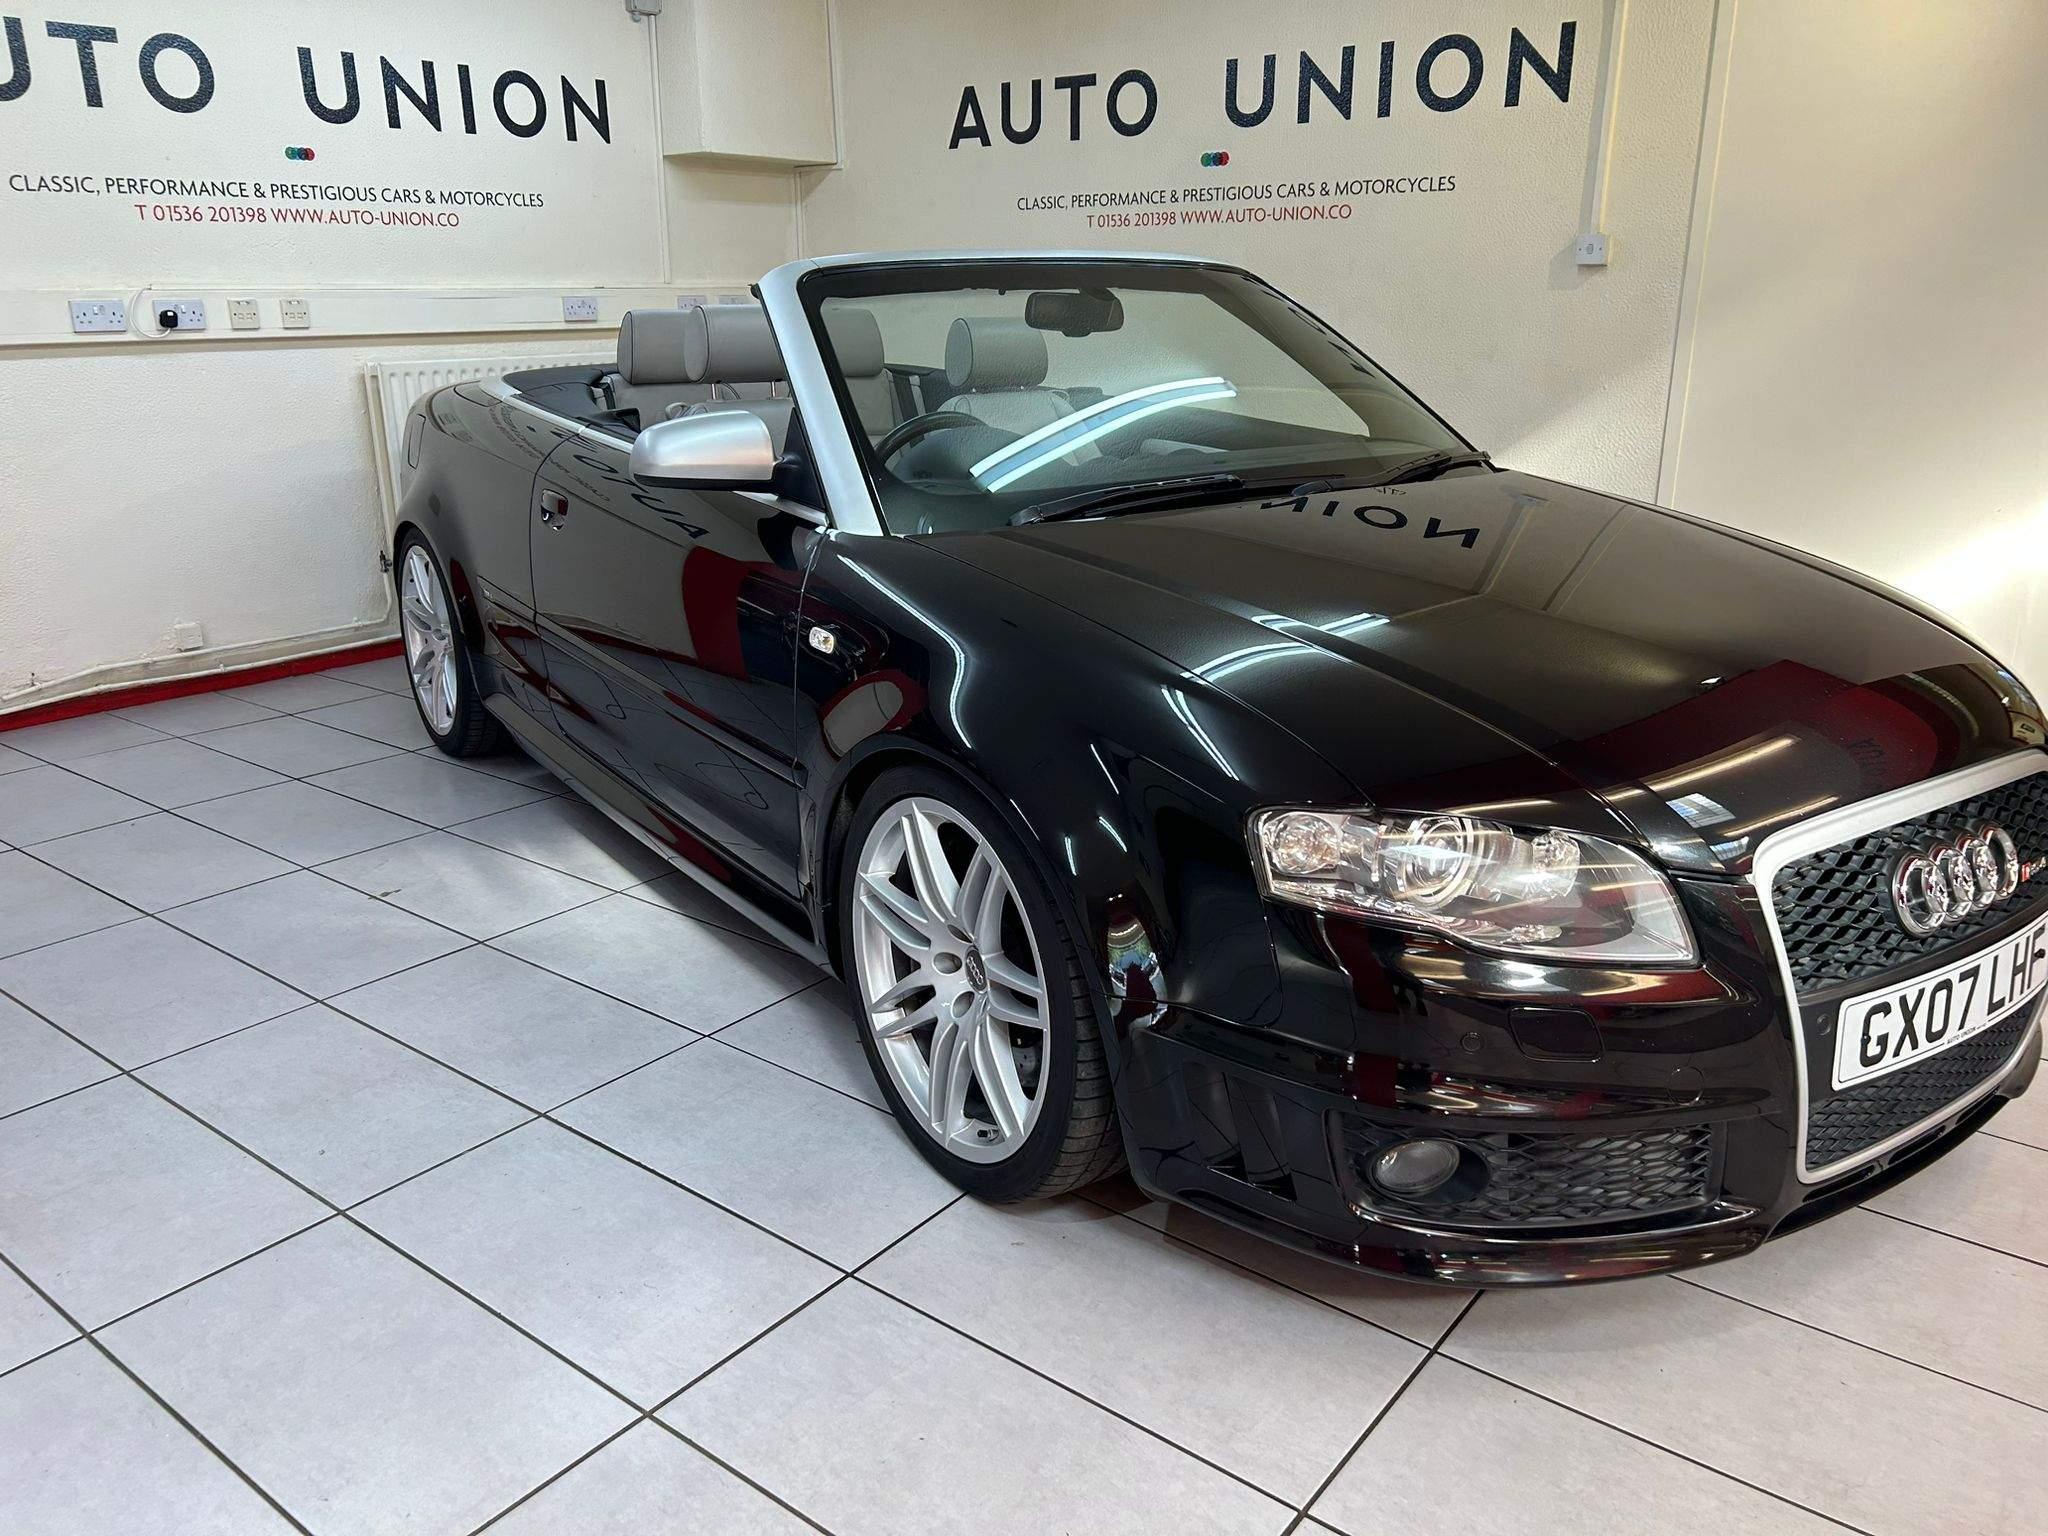 Used Audi RS4 Cabriolet Convertible Cars For Sale | AutoTrader UK